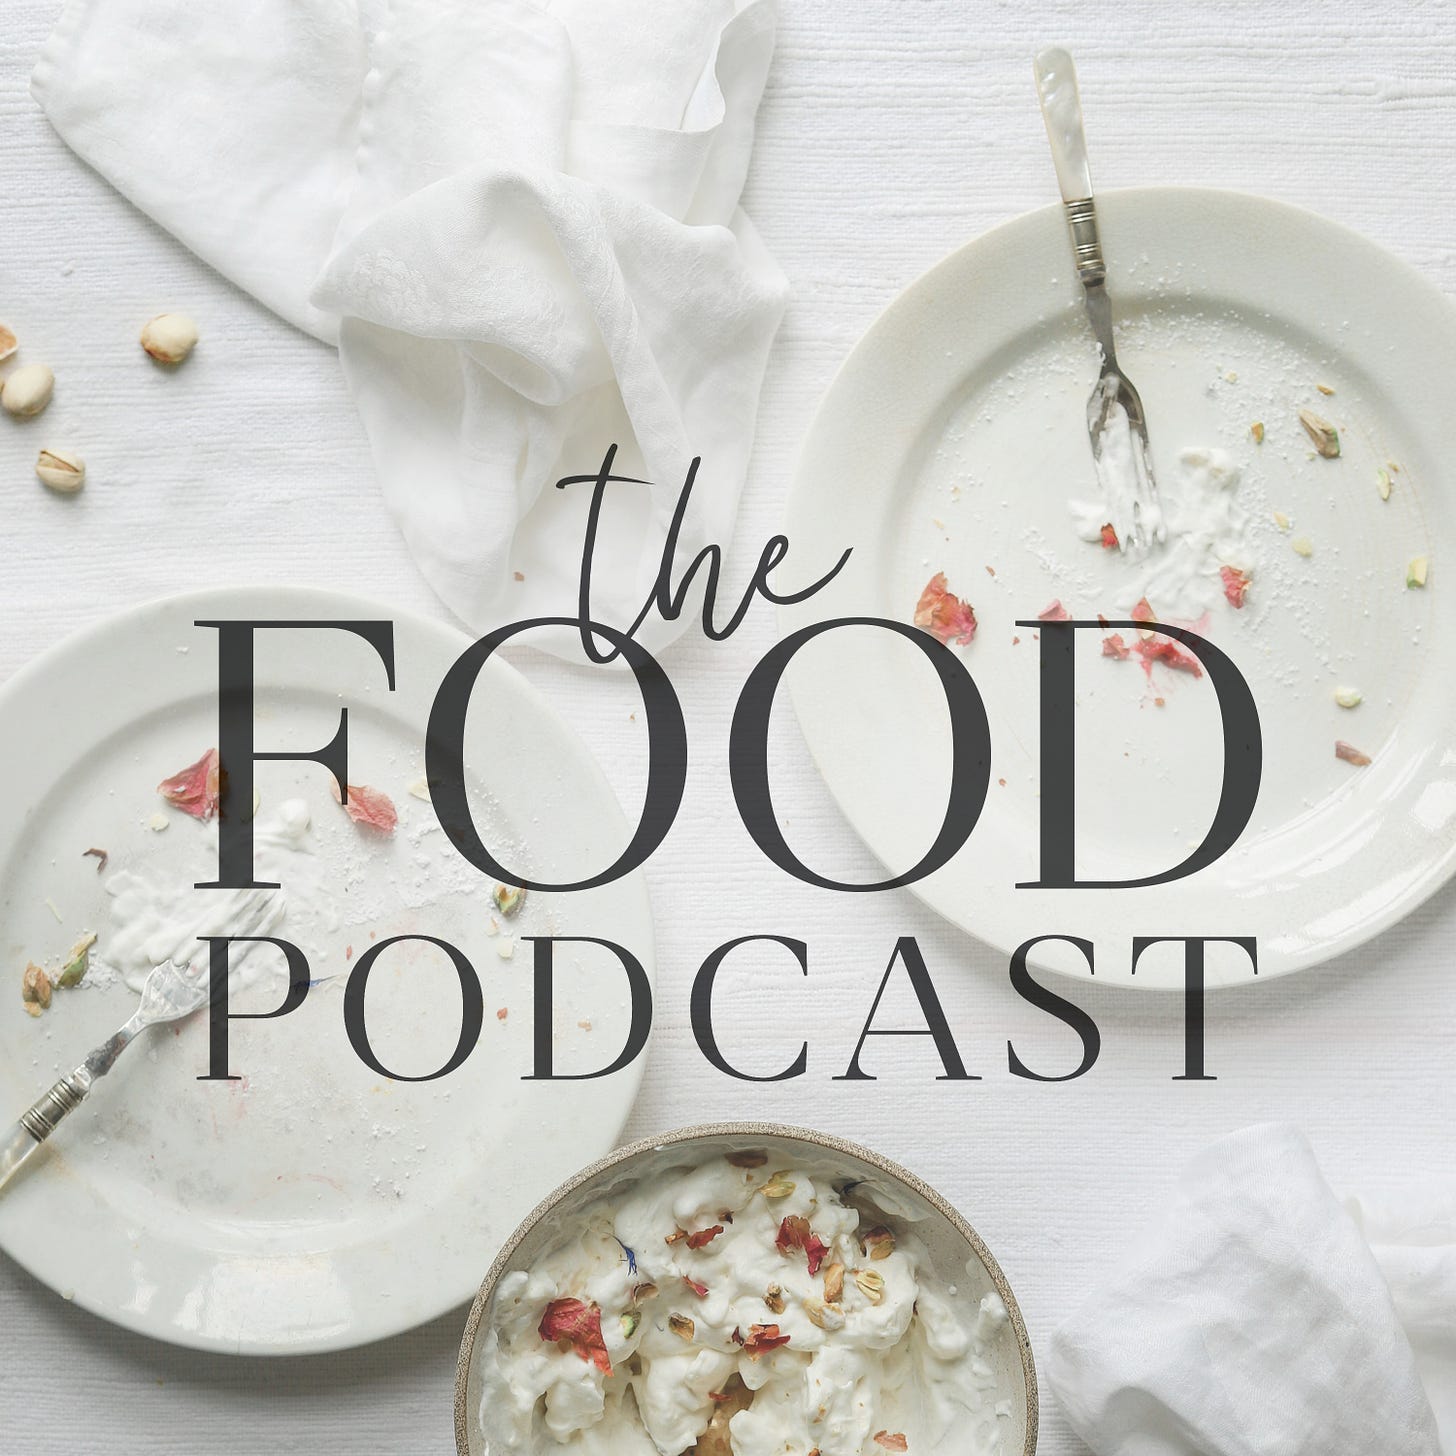 Click to link to episodes of The Food Podcast